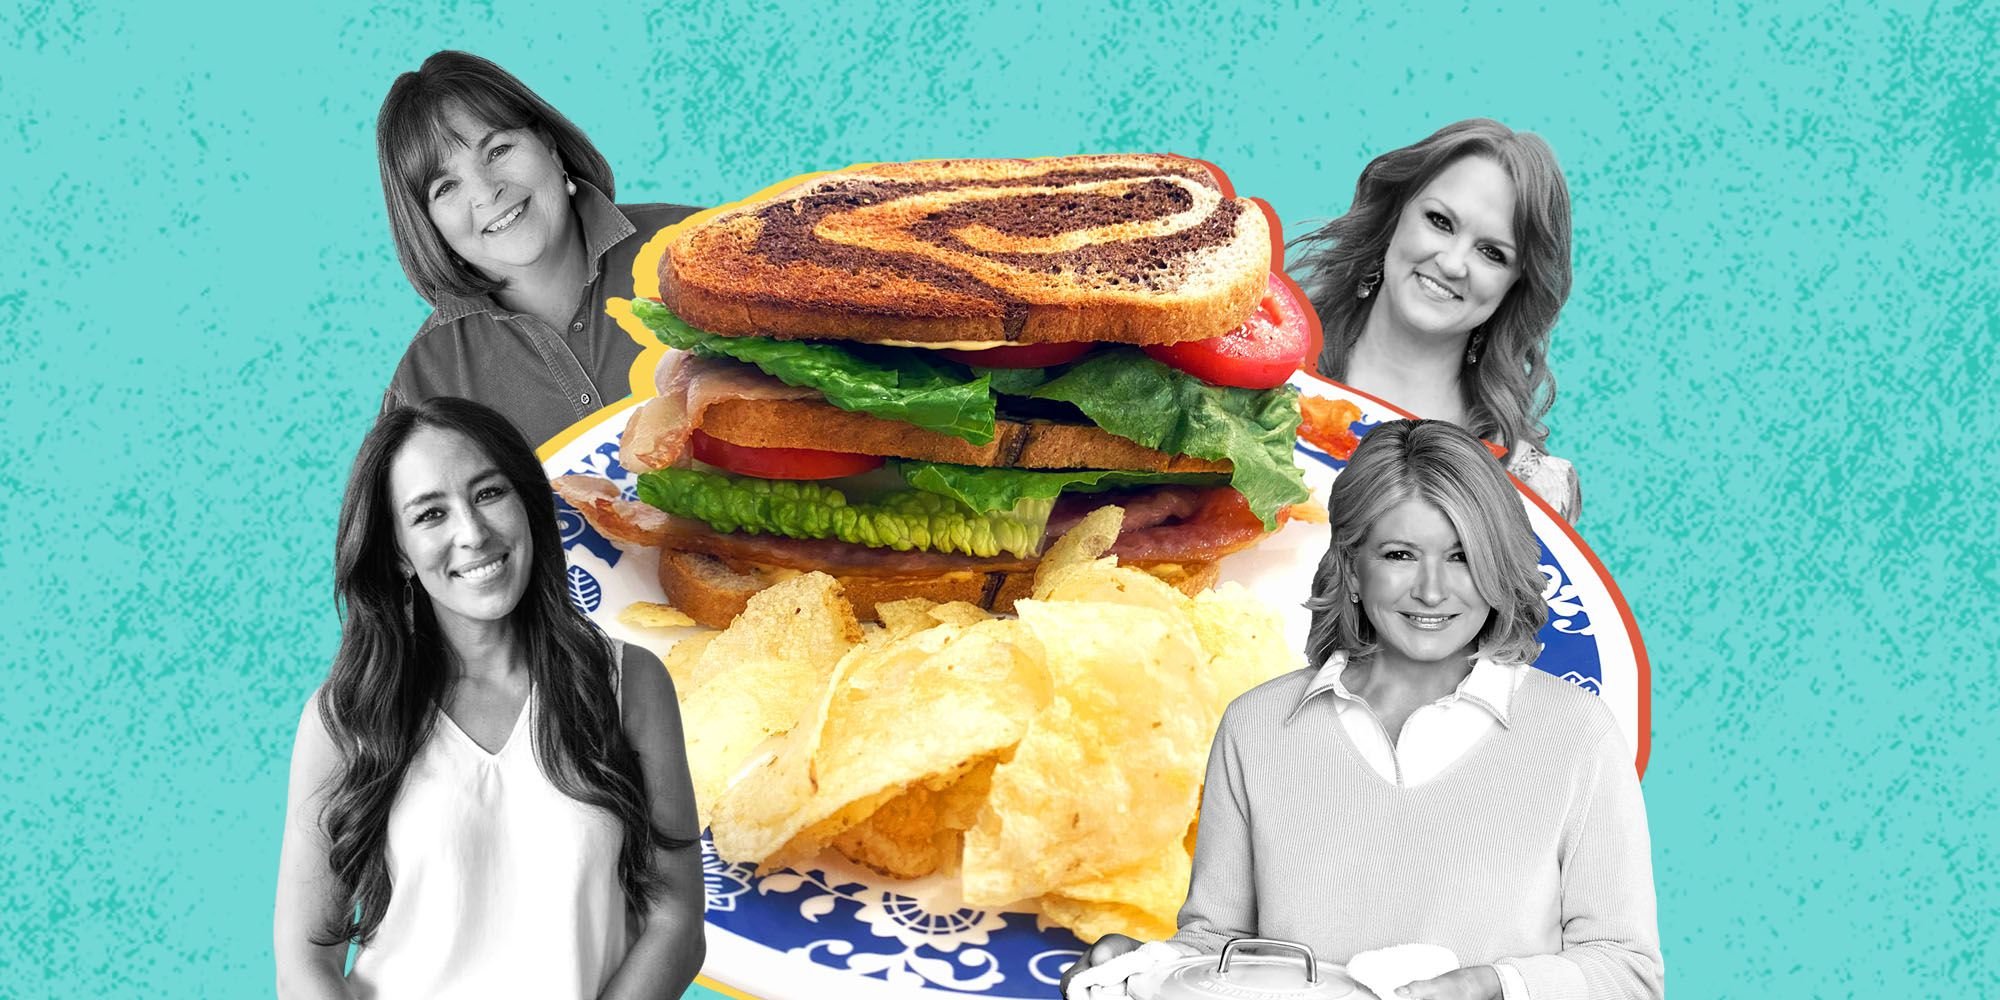 We Tried 4 Top BLT Recipes From Celebrity Chefs — Here's Our Favorite